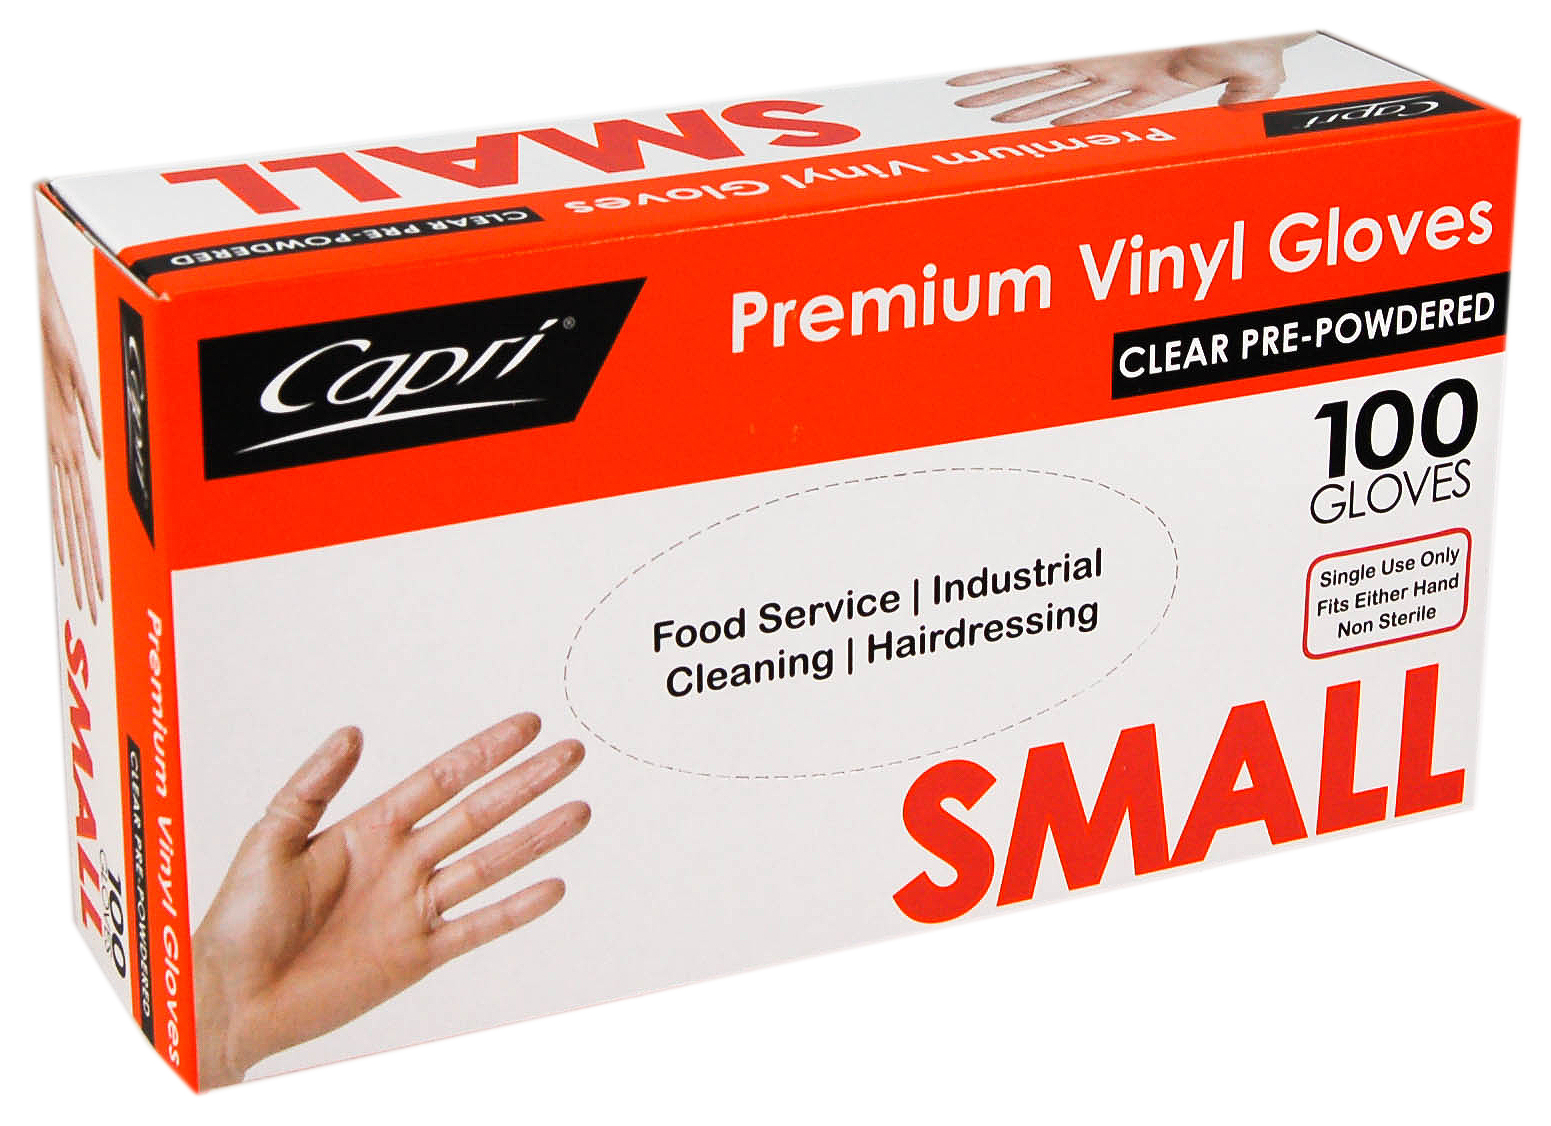 Vinyl Gloves Clear Pre-Powdered Small